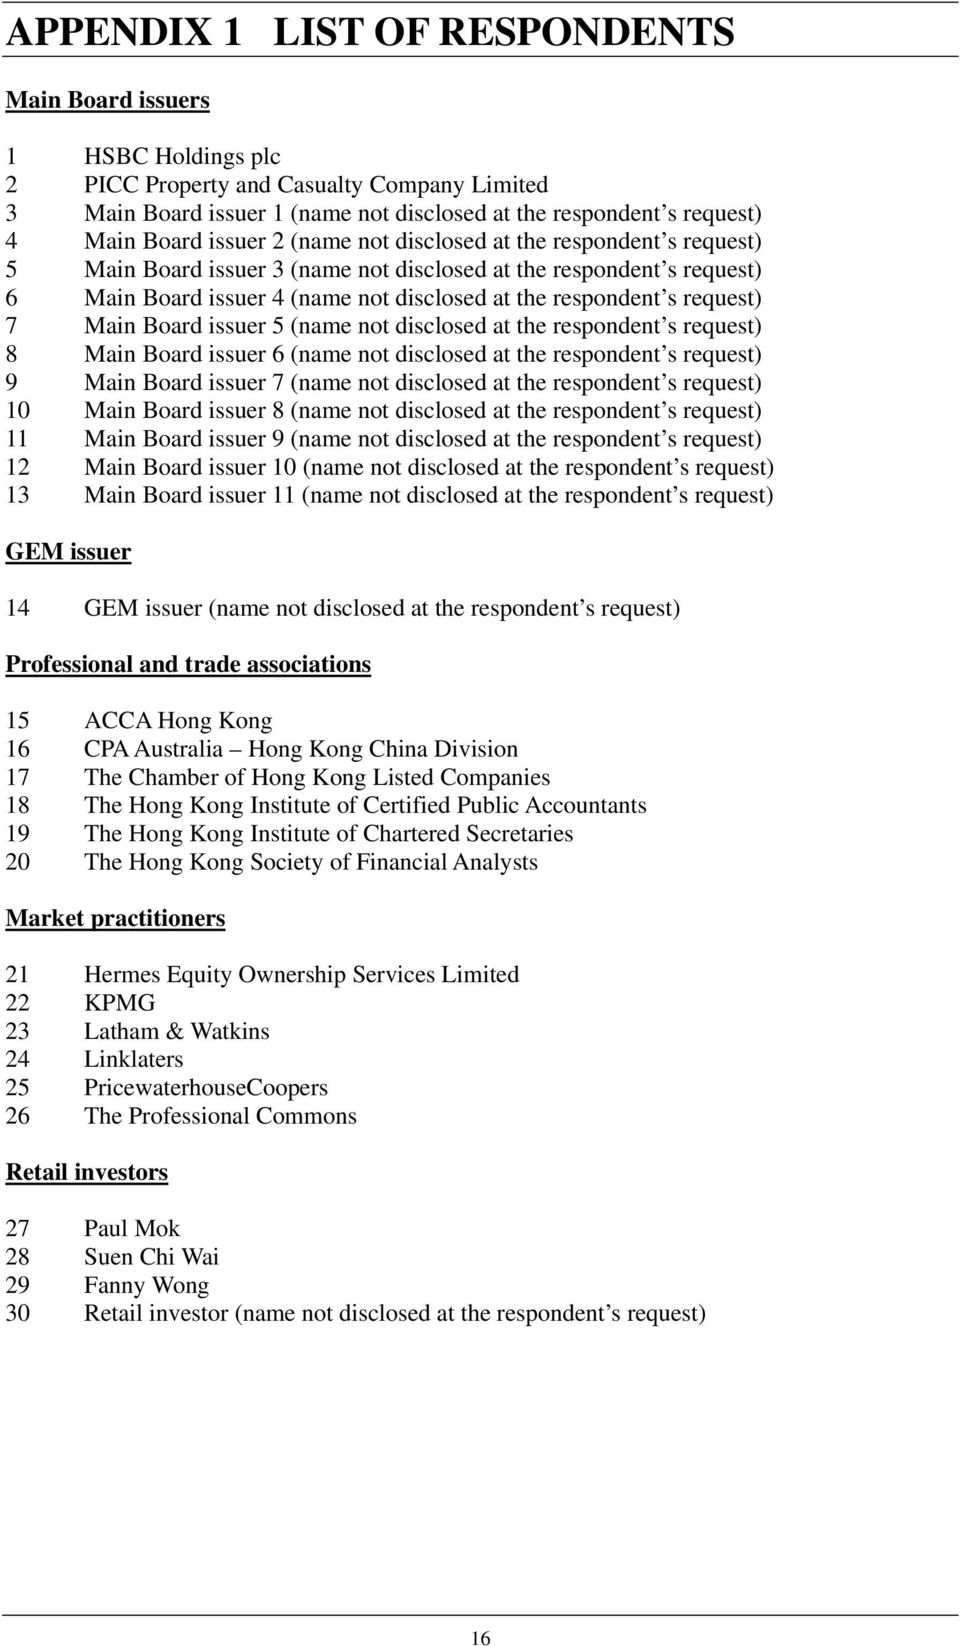 7 Main Board issuer 5 (name not disclosed at the respondent s request) 8 Main Board issuer 6 (name not disclosed at the respondent s request) 9 Main Board issuer 7 (name not disclosed at the